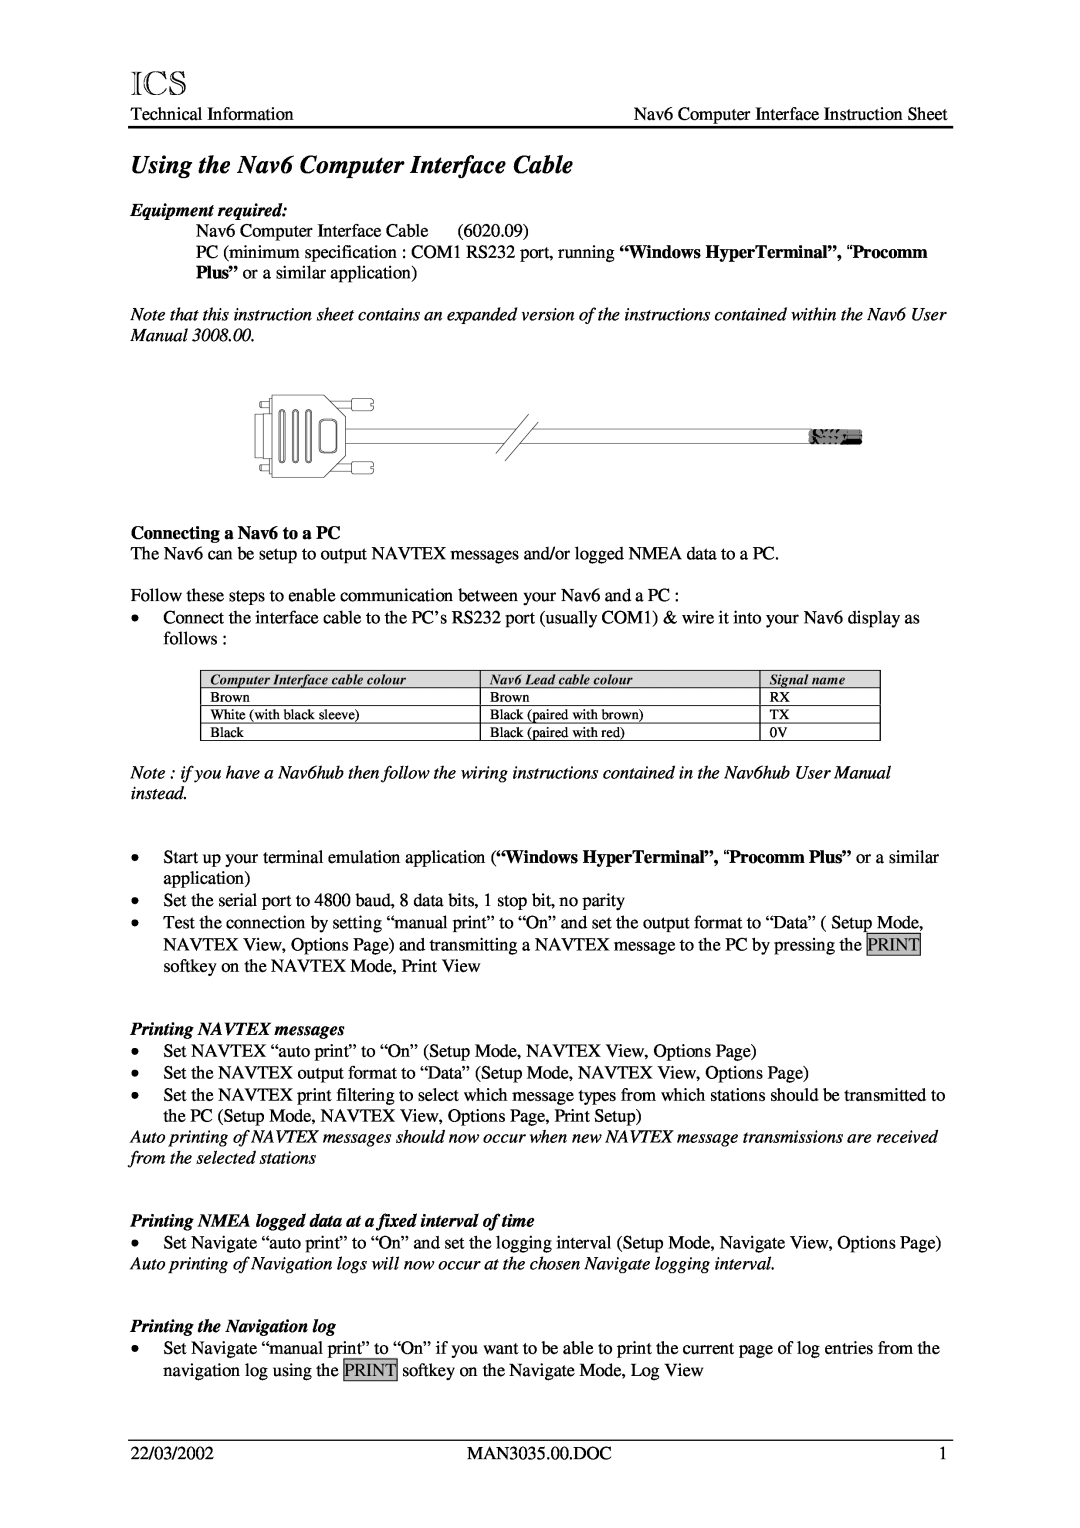 Procom instruction sheet Using the Nav6 Computer Interface Cable, Equipment required, Connecting a Nav6 to a PC 